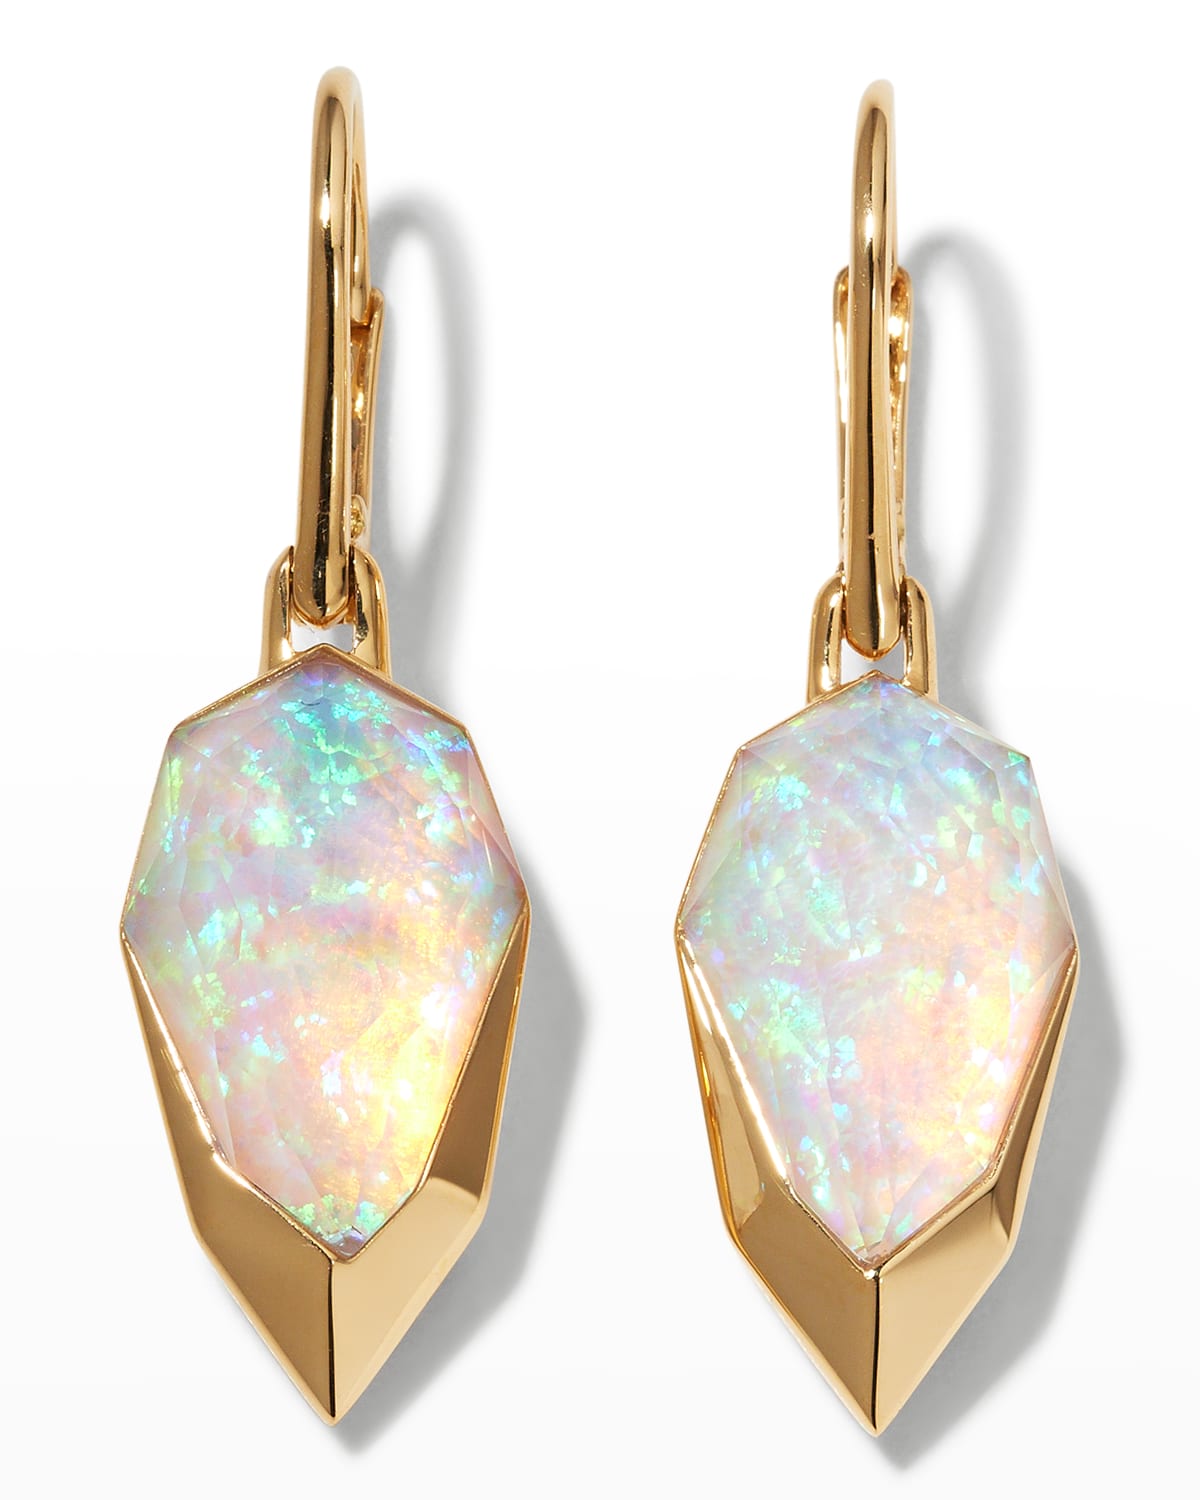 Stephen Webster Yellow Gold Diced Pear Earrings With Opalescent Clear Quartz